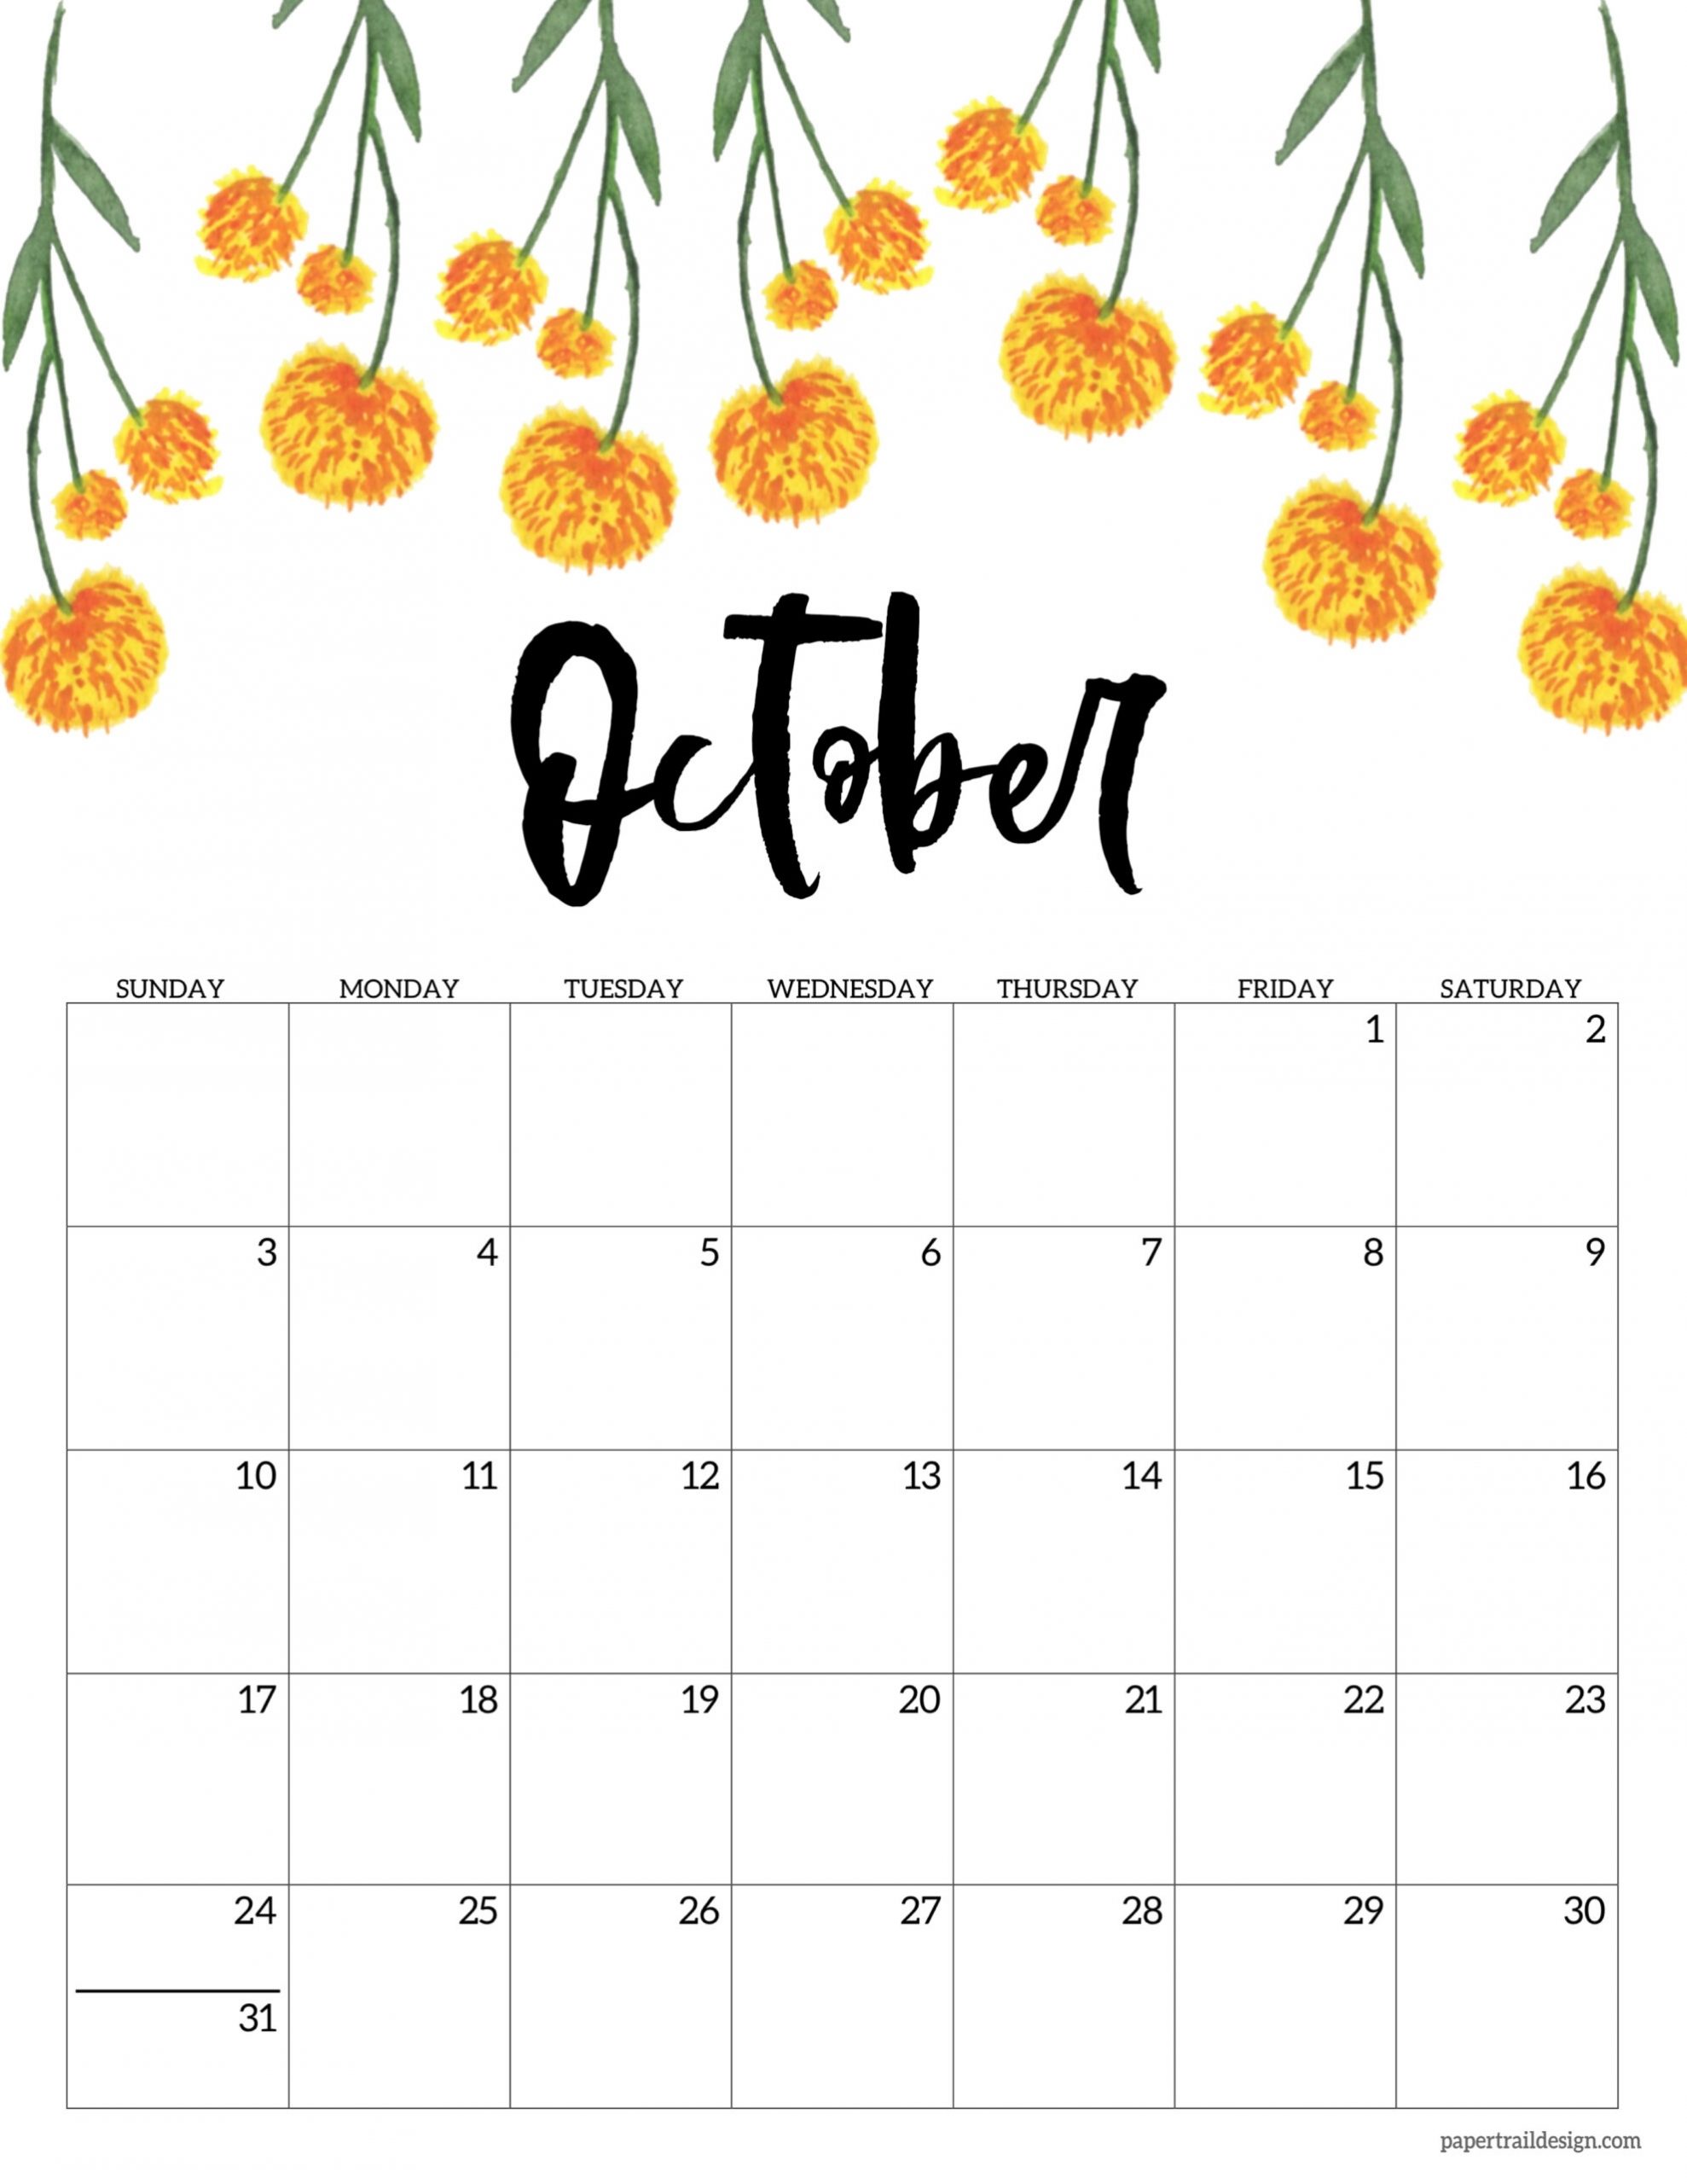 Collect August 2021 Printable Calendar With Flowers